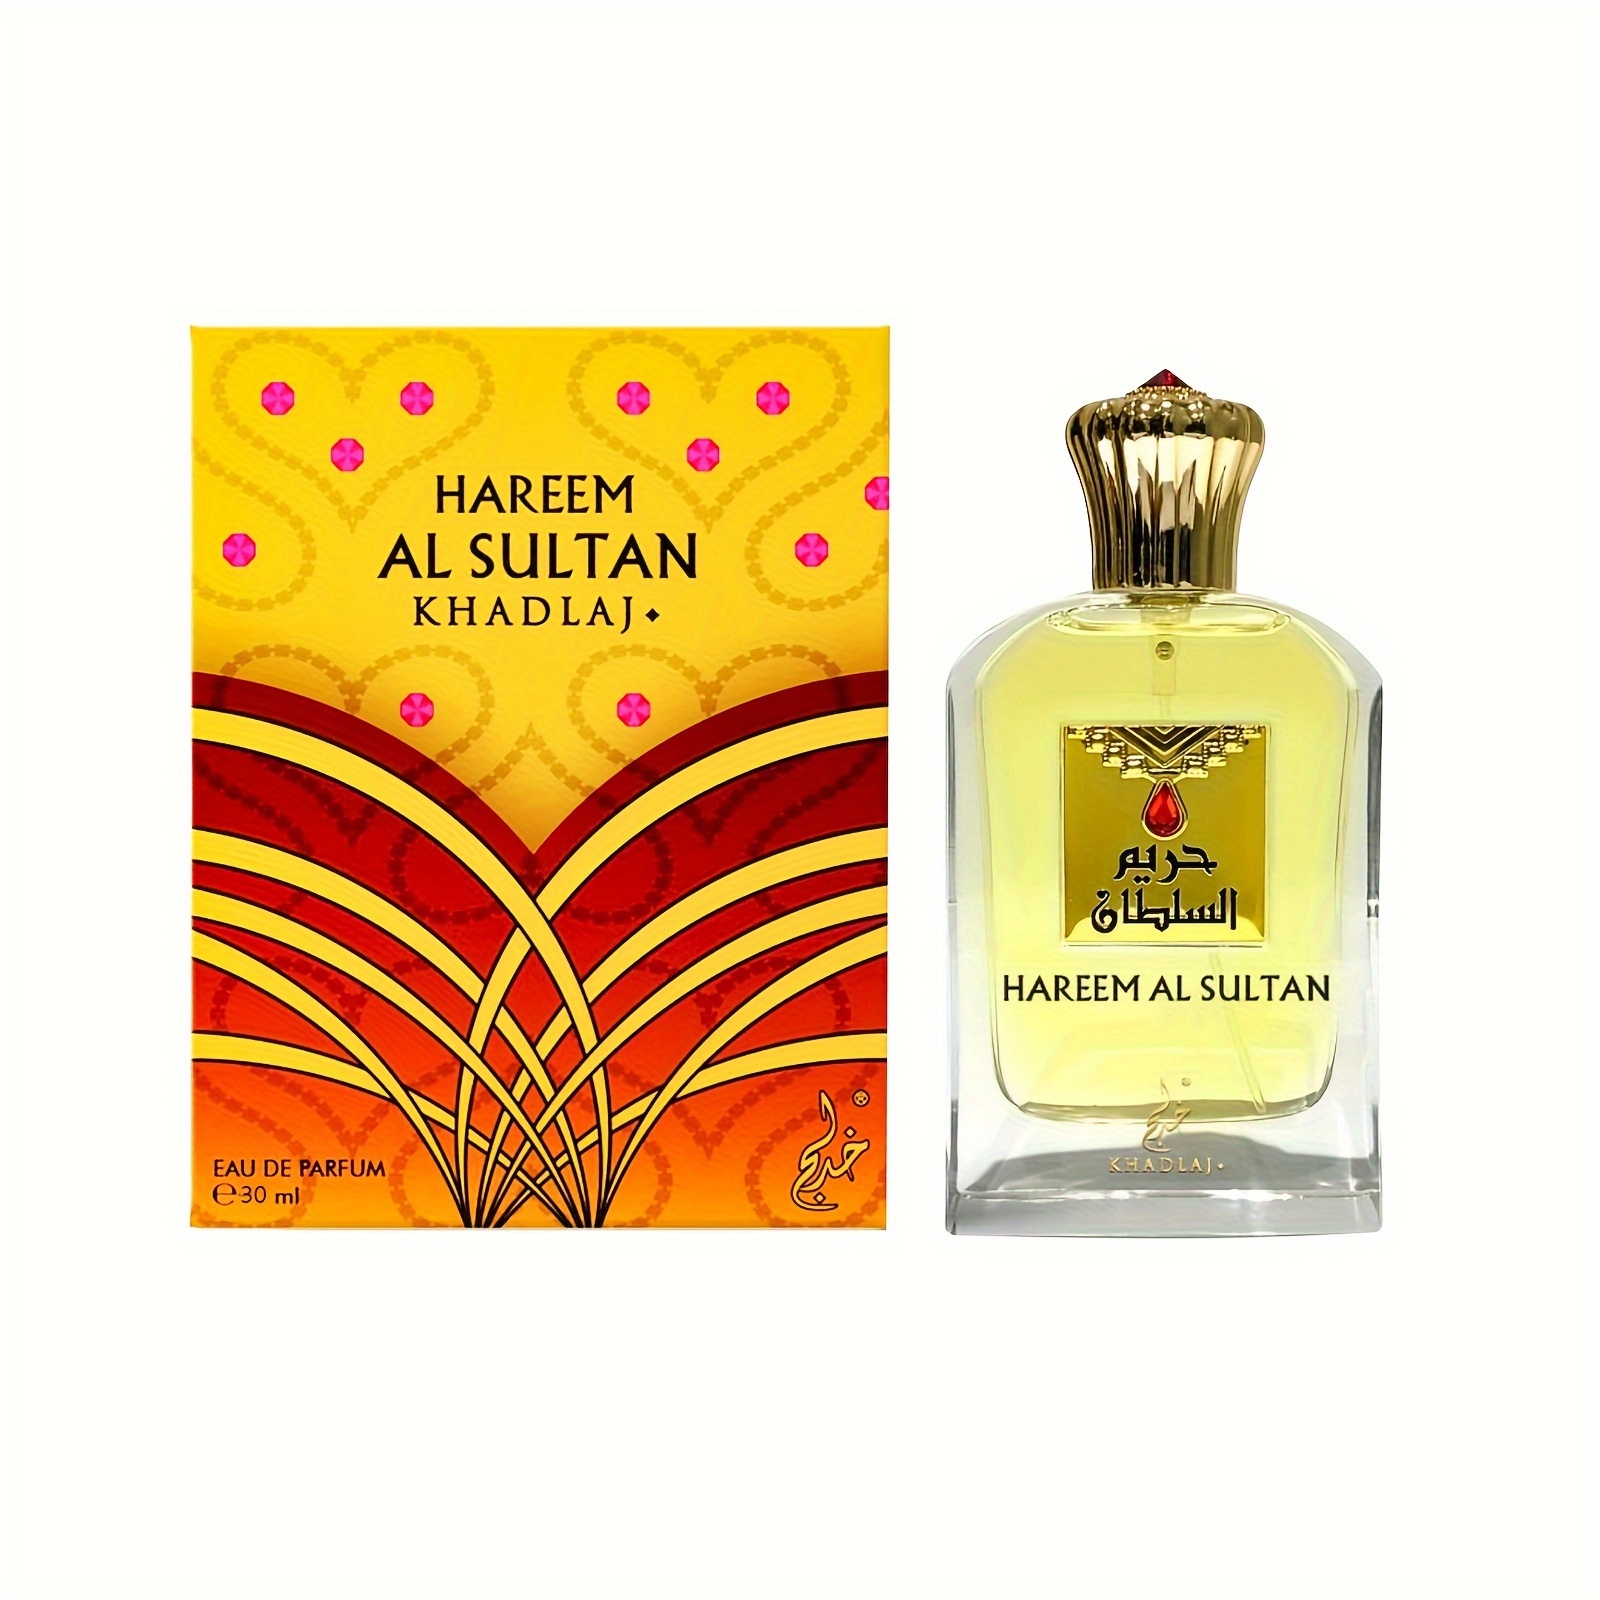 

By Khadlaj Perfume Spray 30ml - Fresh Scented Liquid Cologne, Paraben & Alcohol-free, With Delicate Rose & Bergamot Top Notes, Nutmeg And Jasmine Heart Notes, Sandalwood Base - Concentration 5-15%